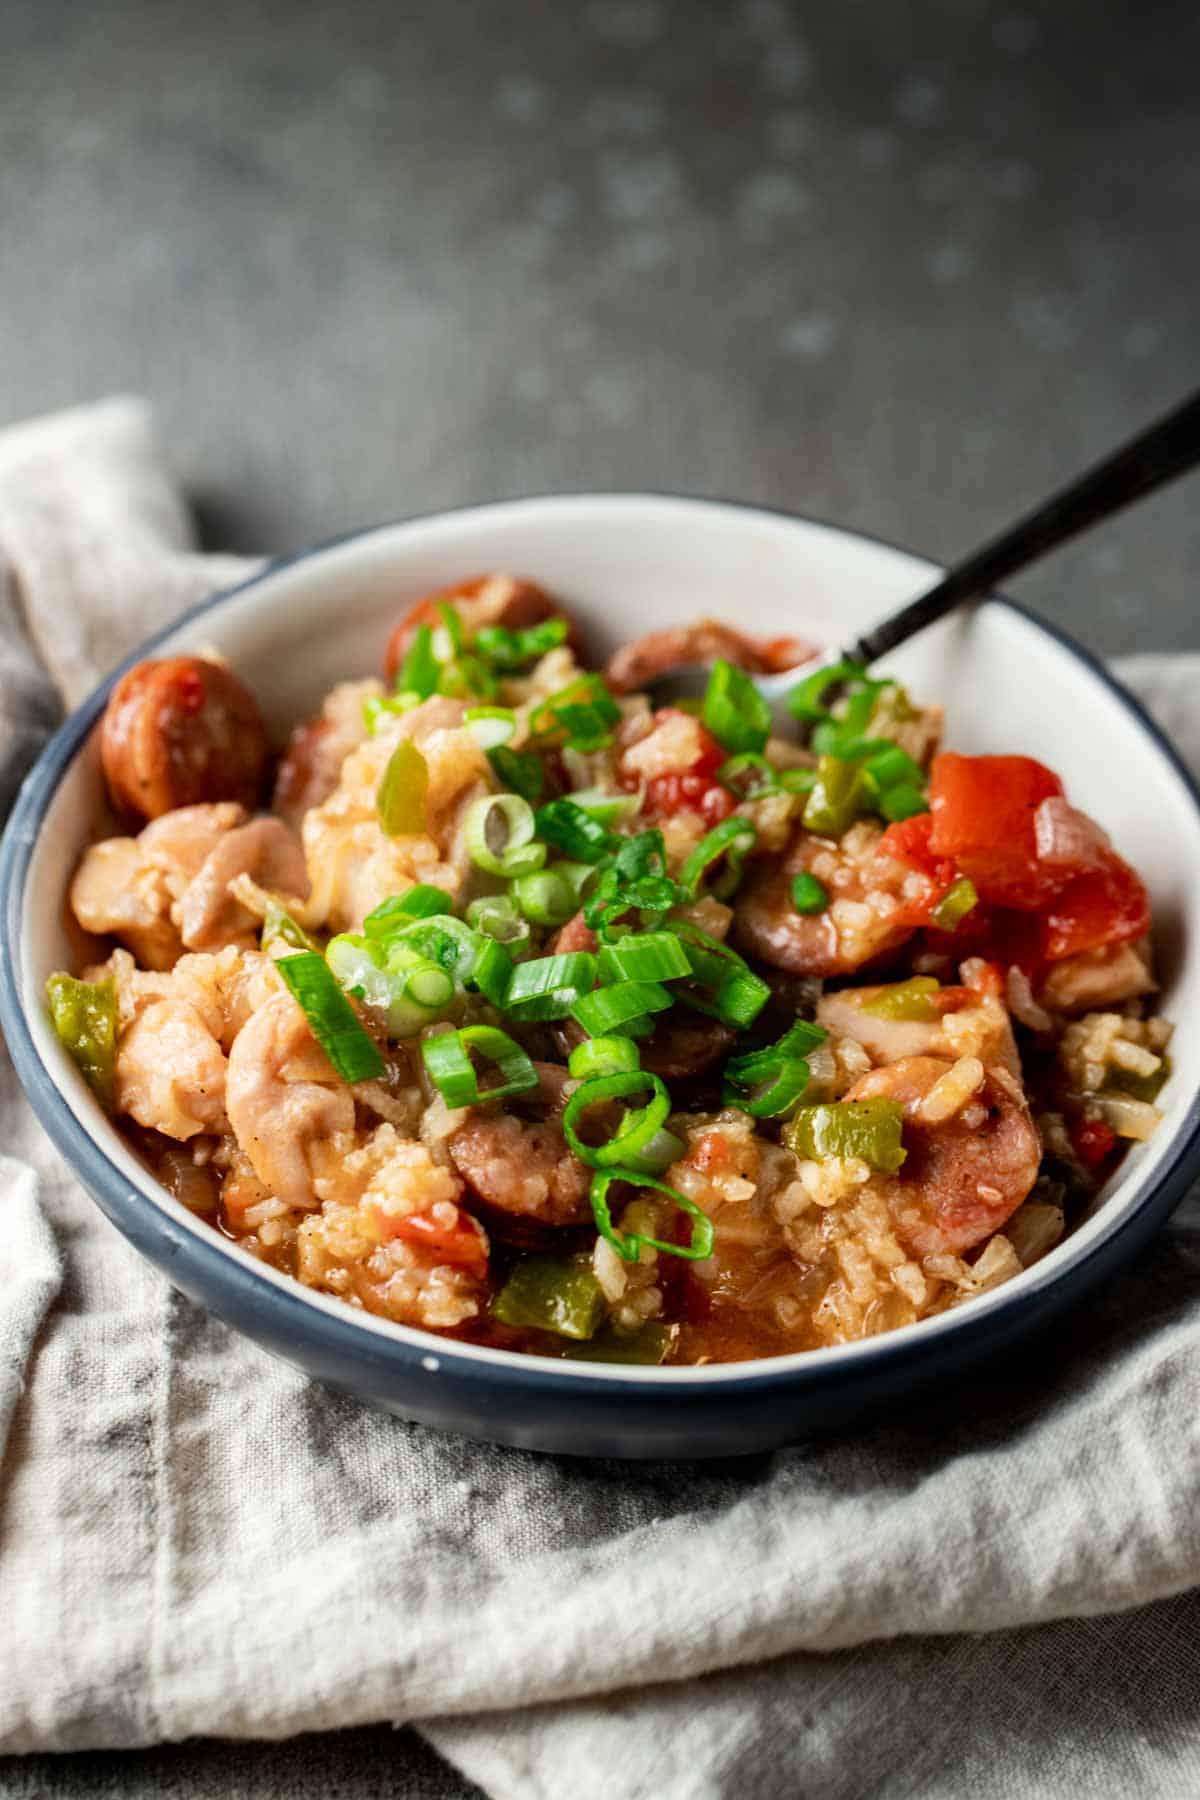 a bowl of rice with veggies and meats and garnished with green onions